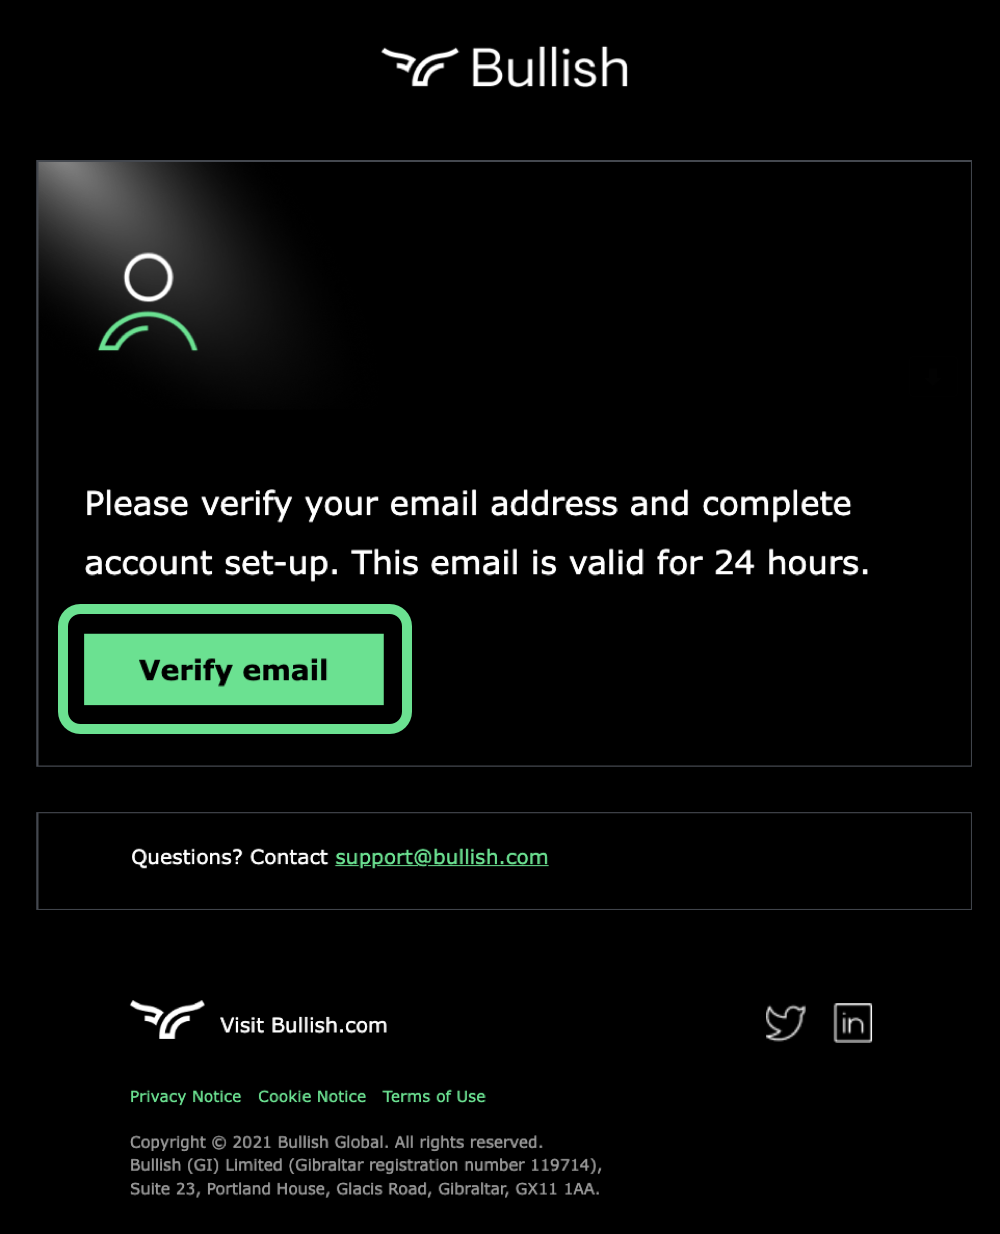 Verify email button in verification email.png